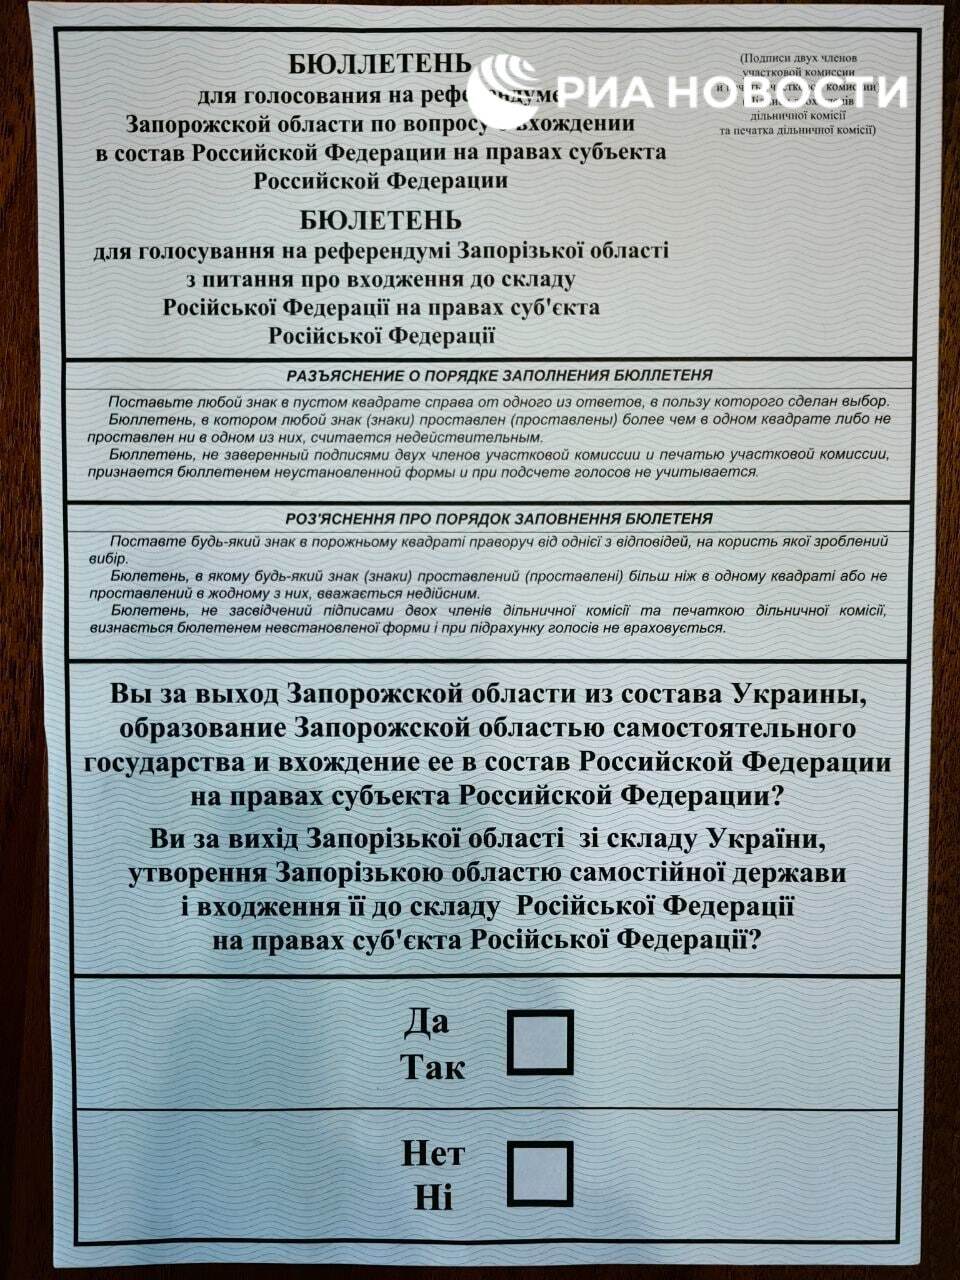 Here's what the ballots for the upcoming referendum in the Zaporozhye region look like - Picture with text, Politics, Bulletin, Referendum, Риа Новости, Video, Soundless, Longpost, Zaporizhzhia